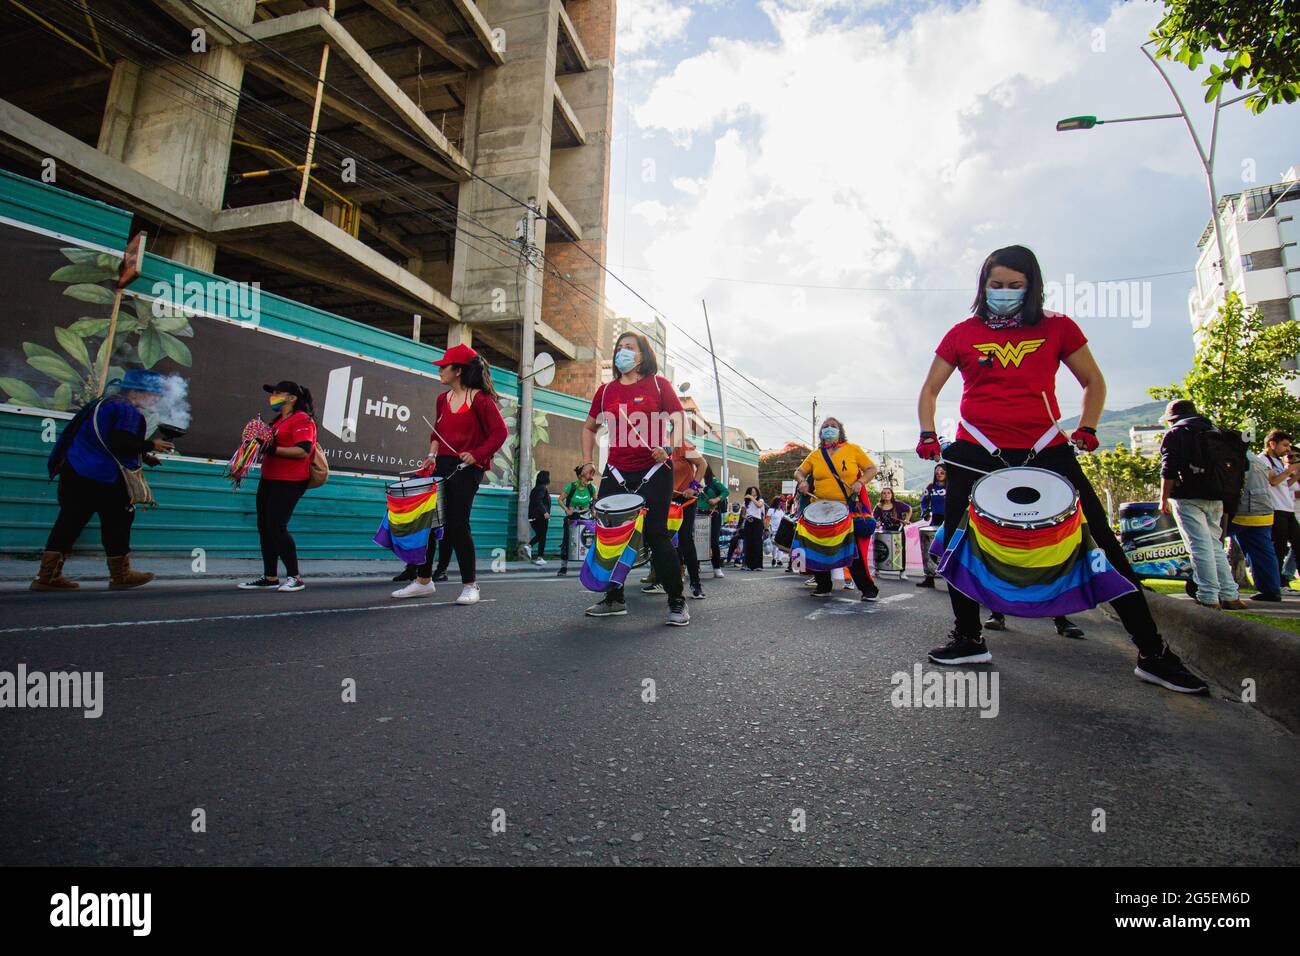 Members of an LGTBQ batucada drum group participate during the annual celebreation of the Pride Parade in demand of LGTBQ rights in Colombia in Pasto, Narino - Colombia on June 25, 2021. Stock Photo